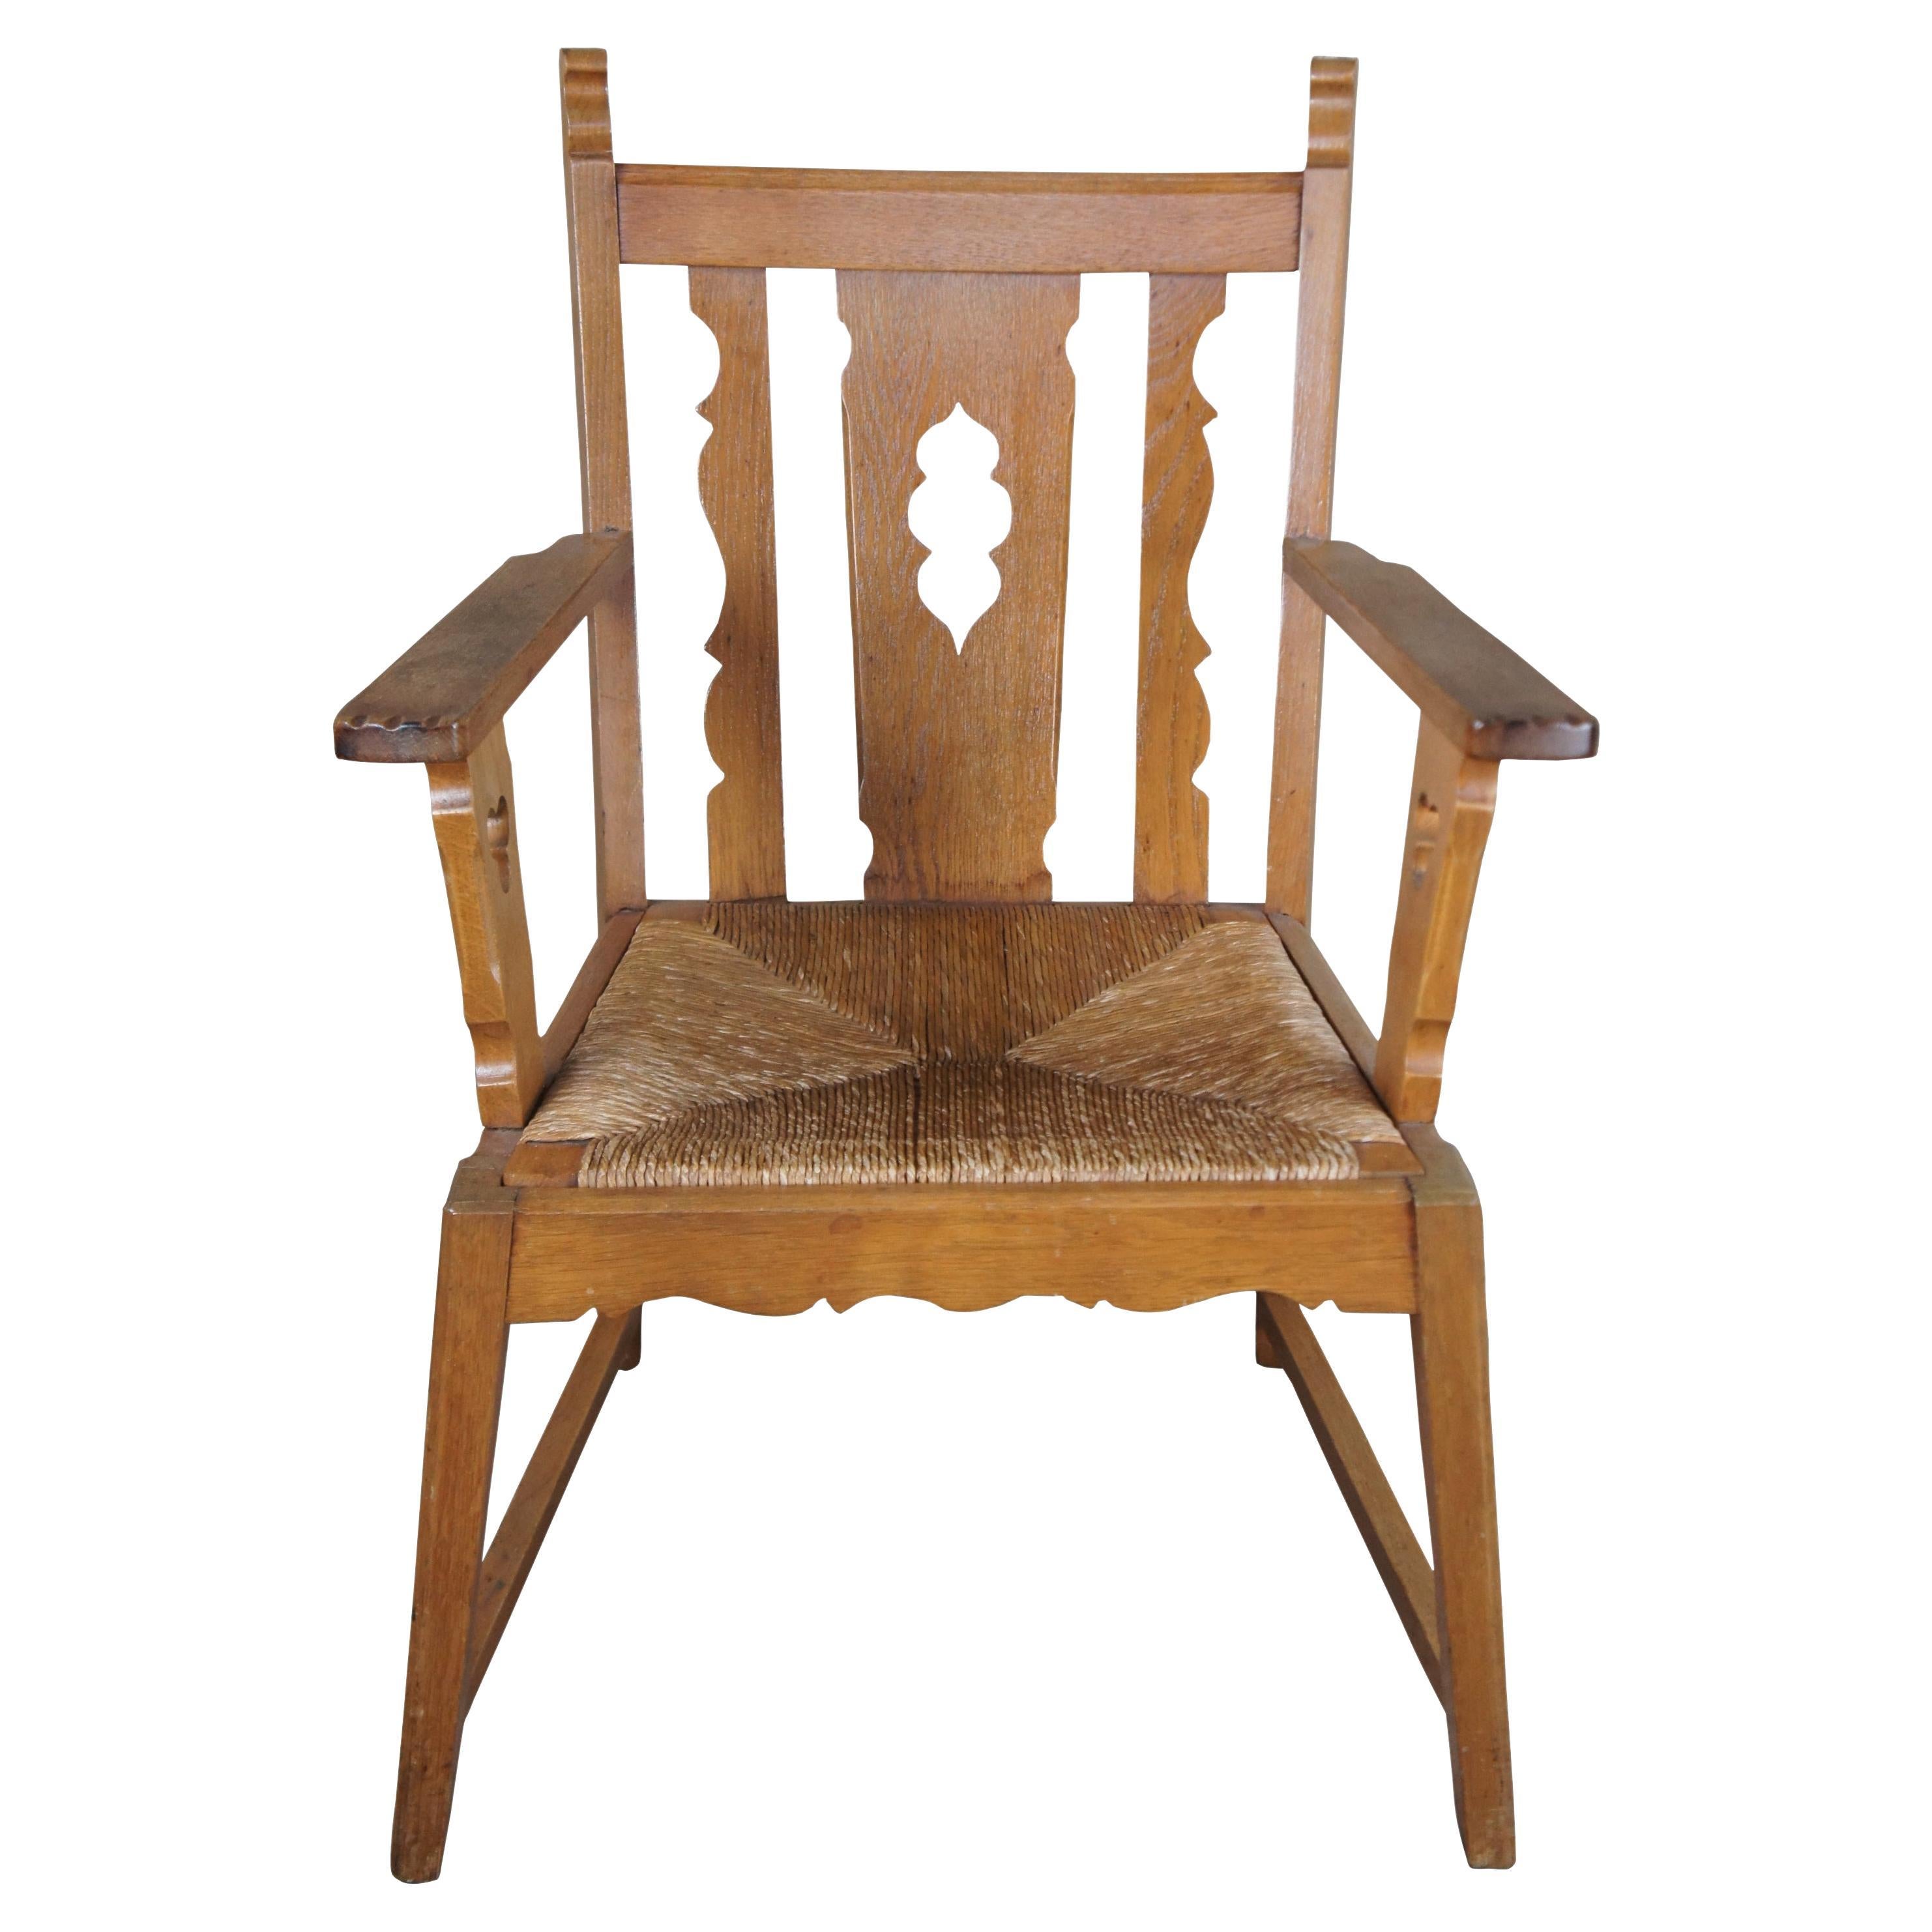 Antique arts & crafts library armchair. Made of oak featuring a rush seat with pierced clover and serpentine design. Old World Carvings and shaping give off the feel of an Irish design. Includes slip seat cushion.

23